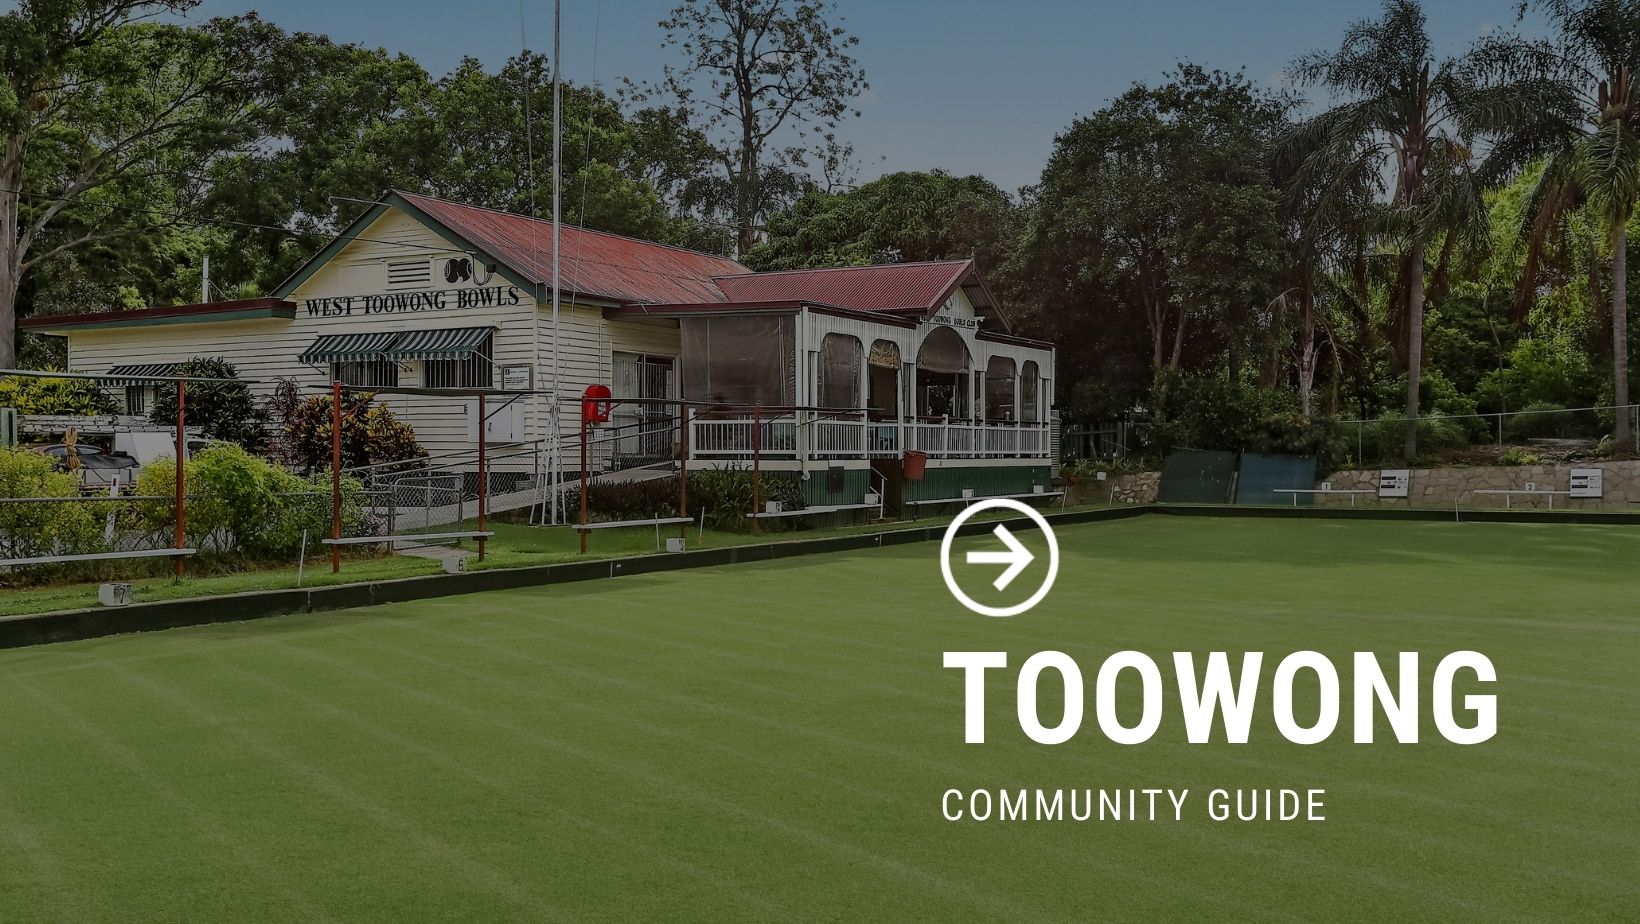 Family life meets city convenience in Toowong